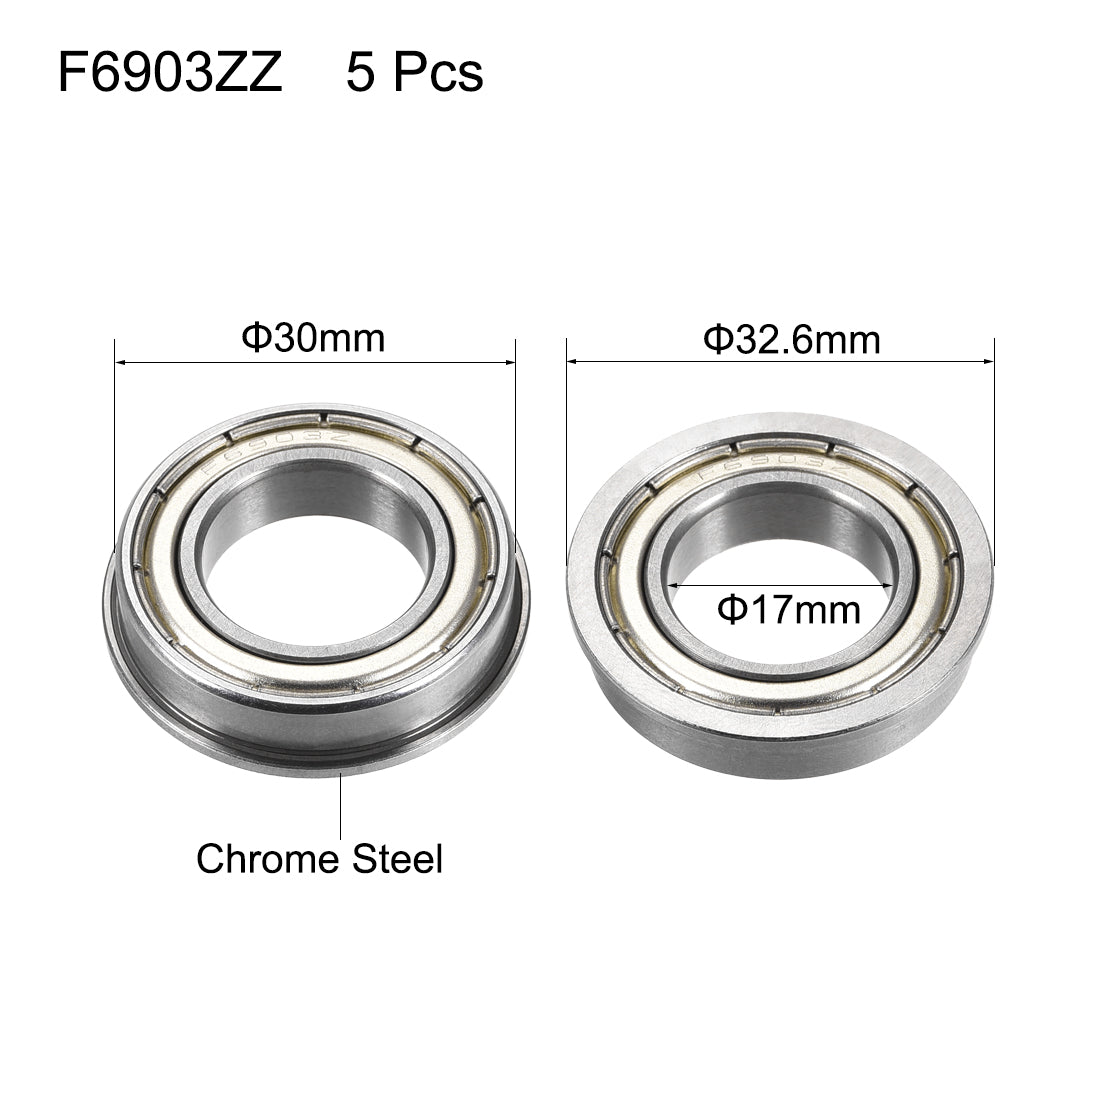 uxcell Uxcell F6903ZZ Flange Ball Bearing 17x30x7mm Double Shielded Chrome Steel Bearings 5pcs